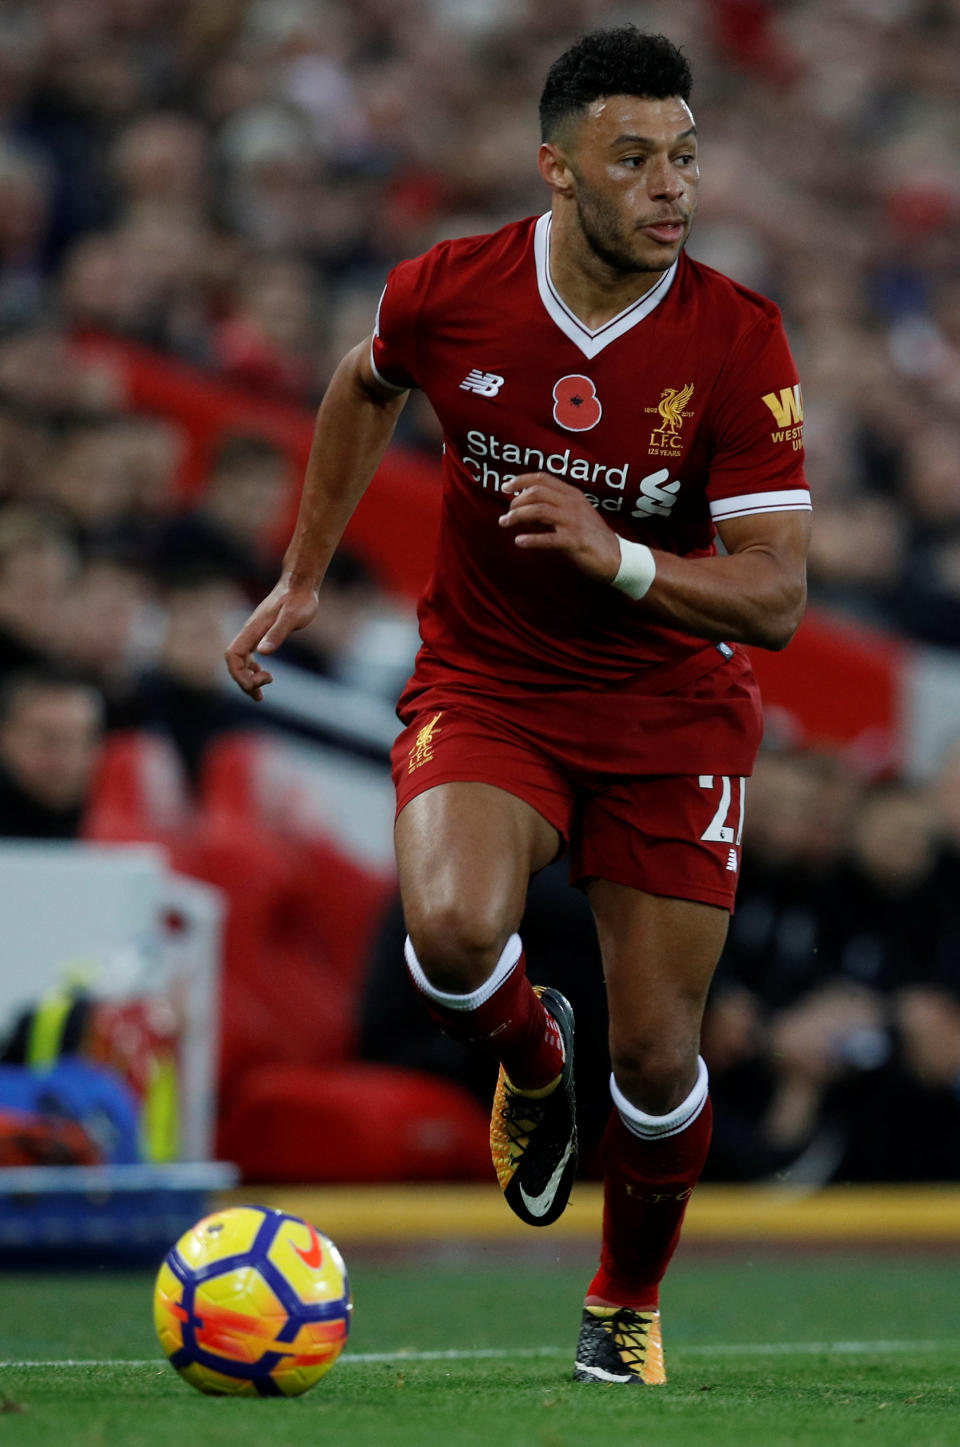 Alex Oxlade-Chamberlain needs more game time with Liverpool